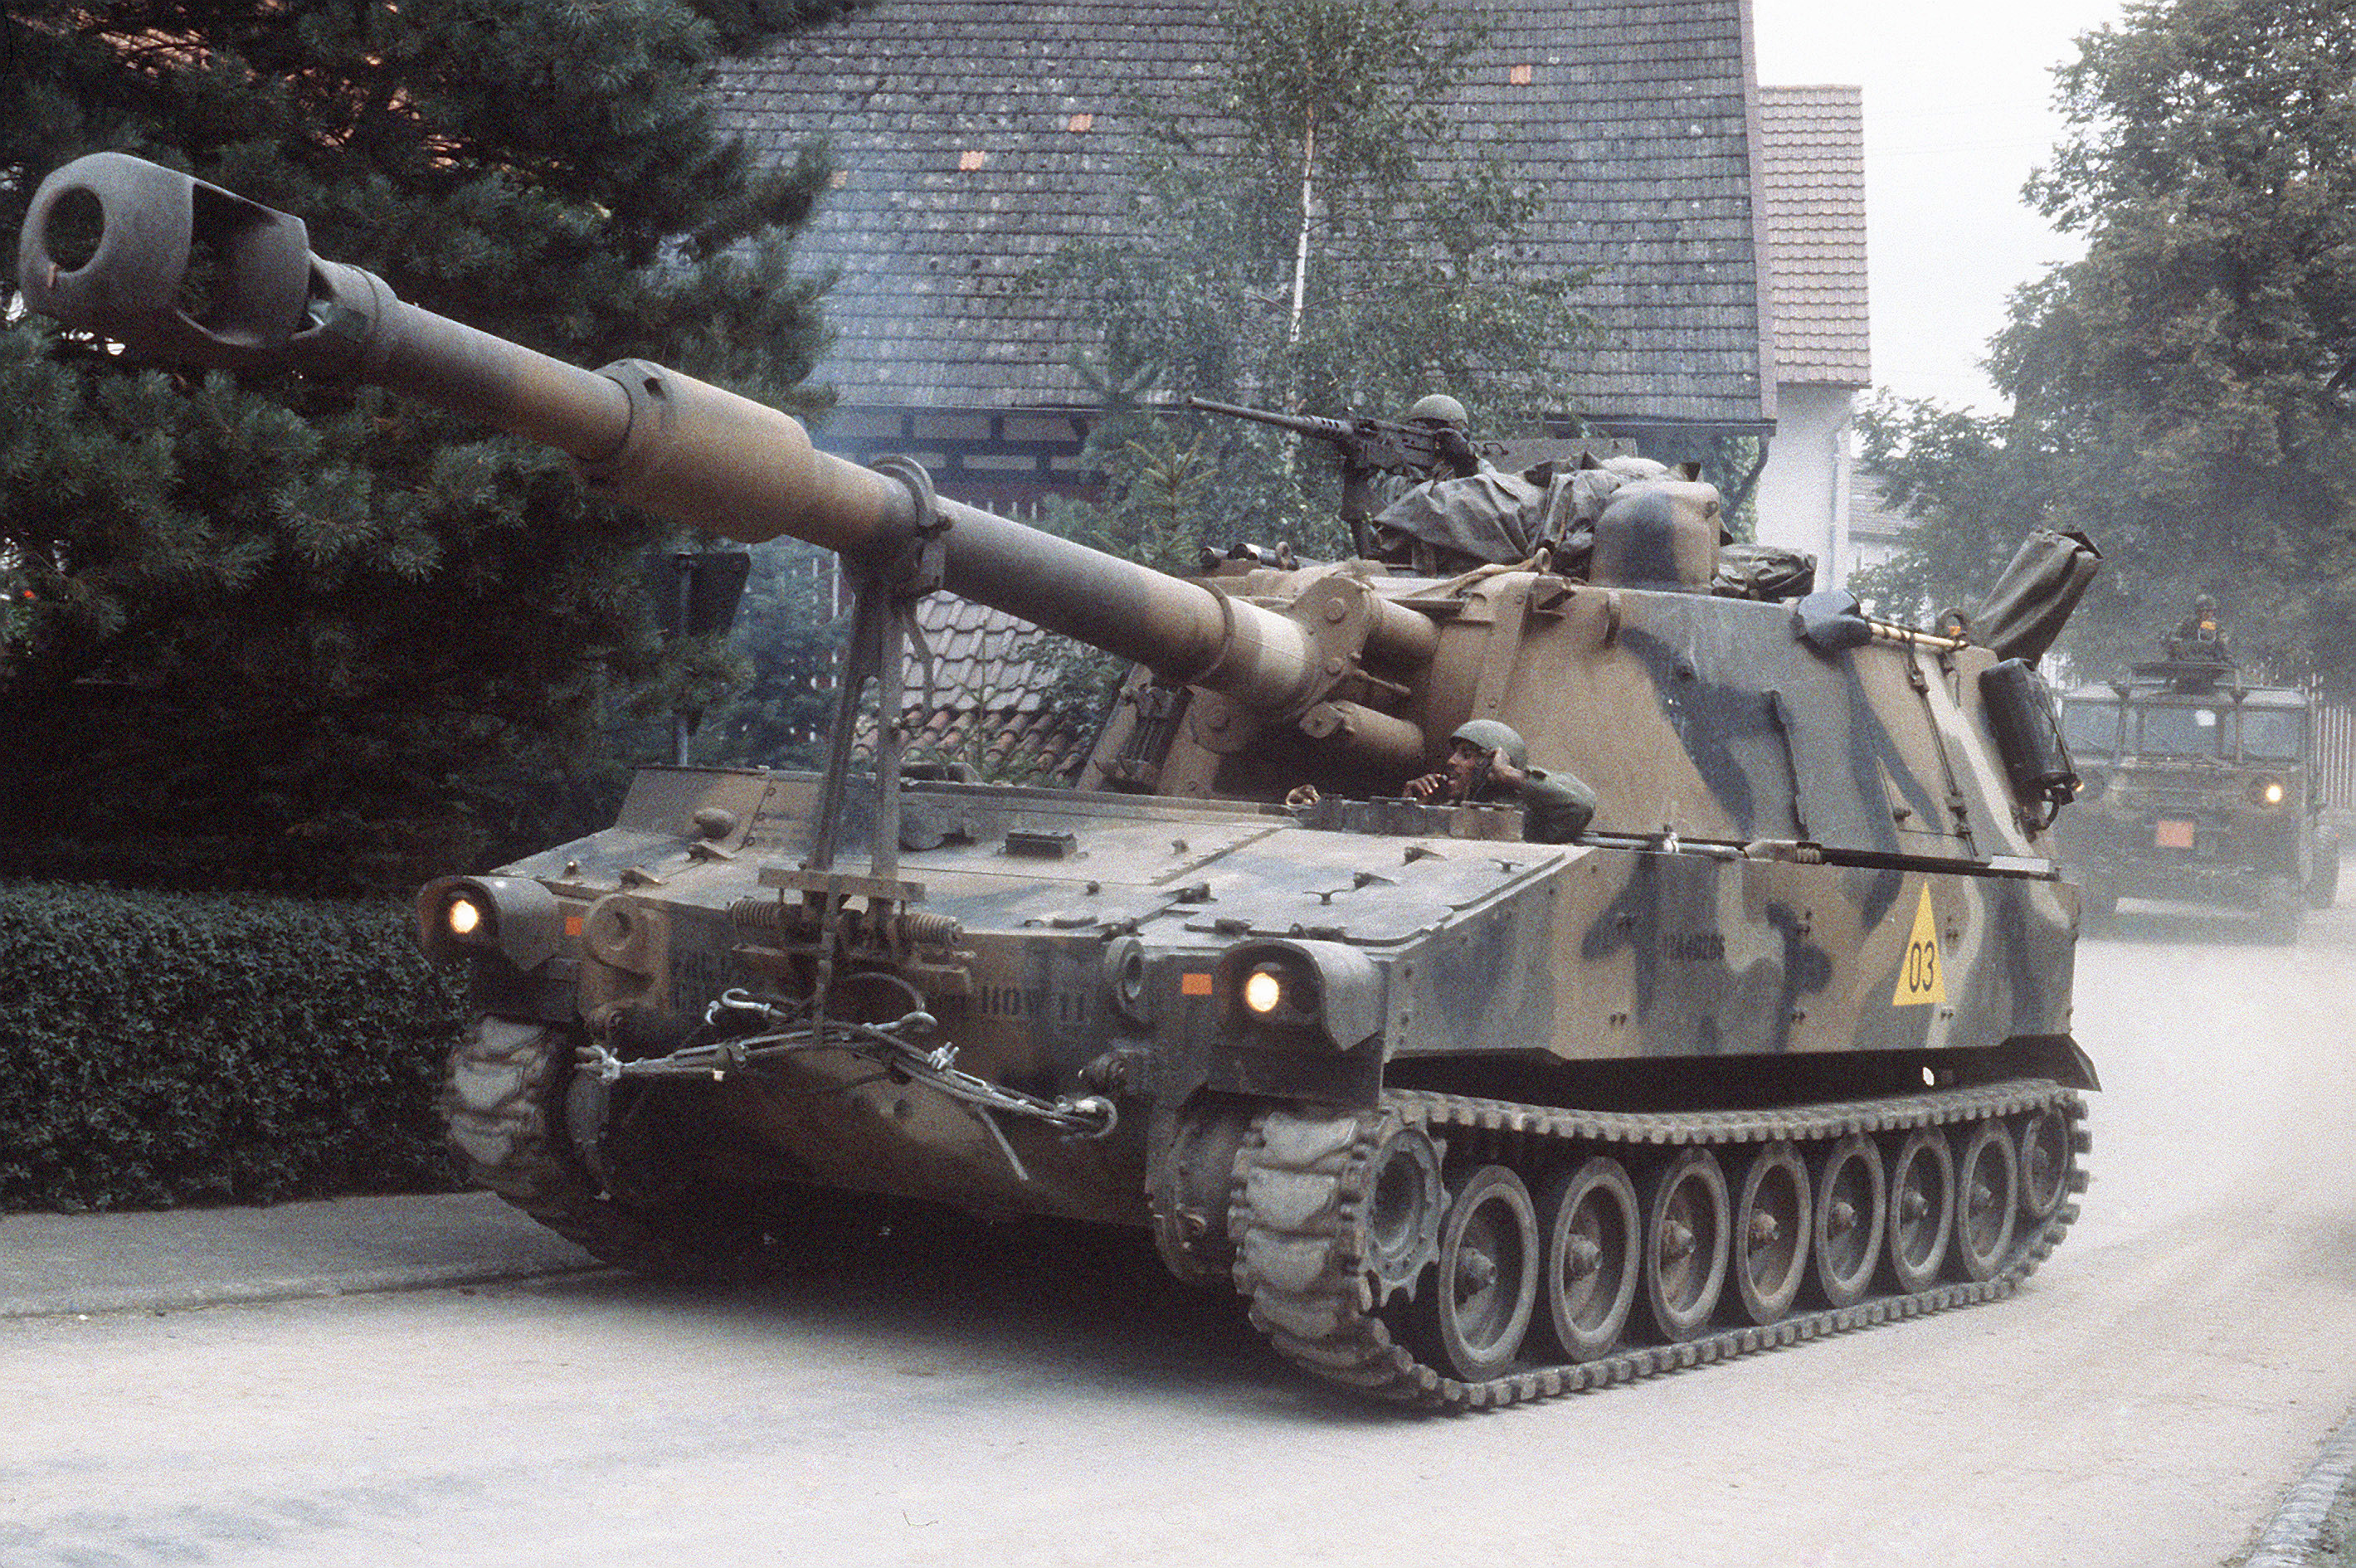 DF-ST-85-05063_An_M109A1_155_mm_self-propelled_Howitzer_passes_through_the_town_of_Schlitz-Willofs_during_Exercise_REFORGER_%2783.jpeg